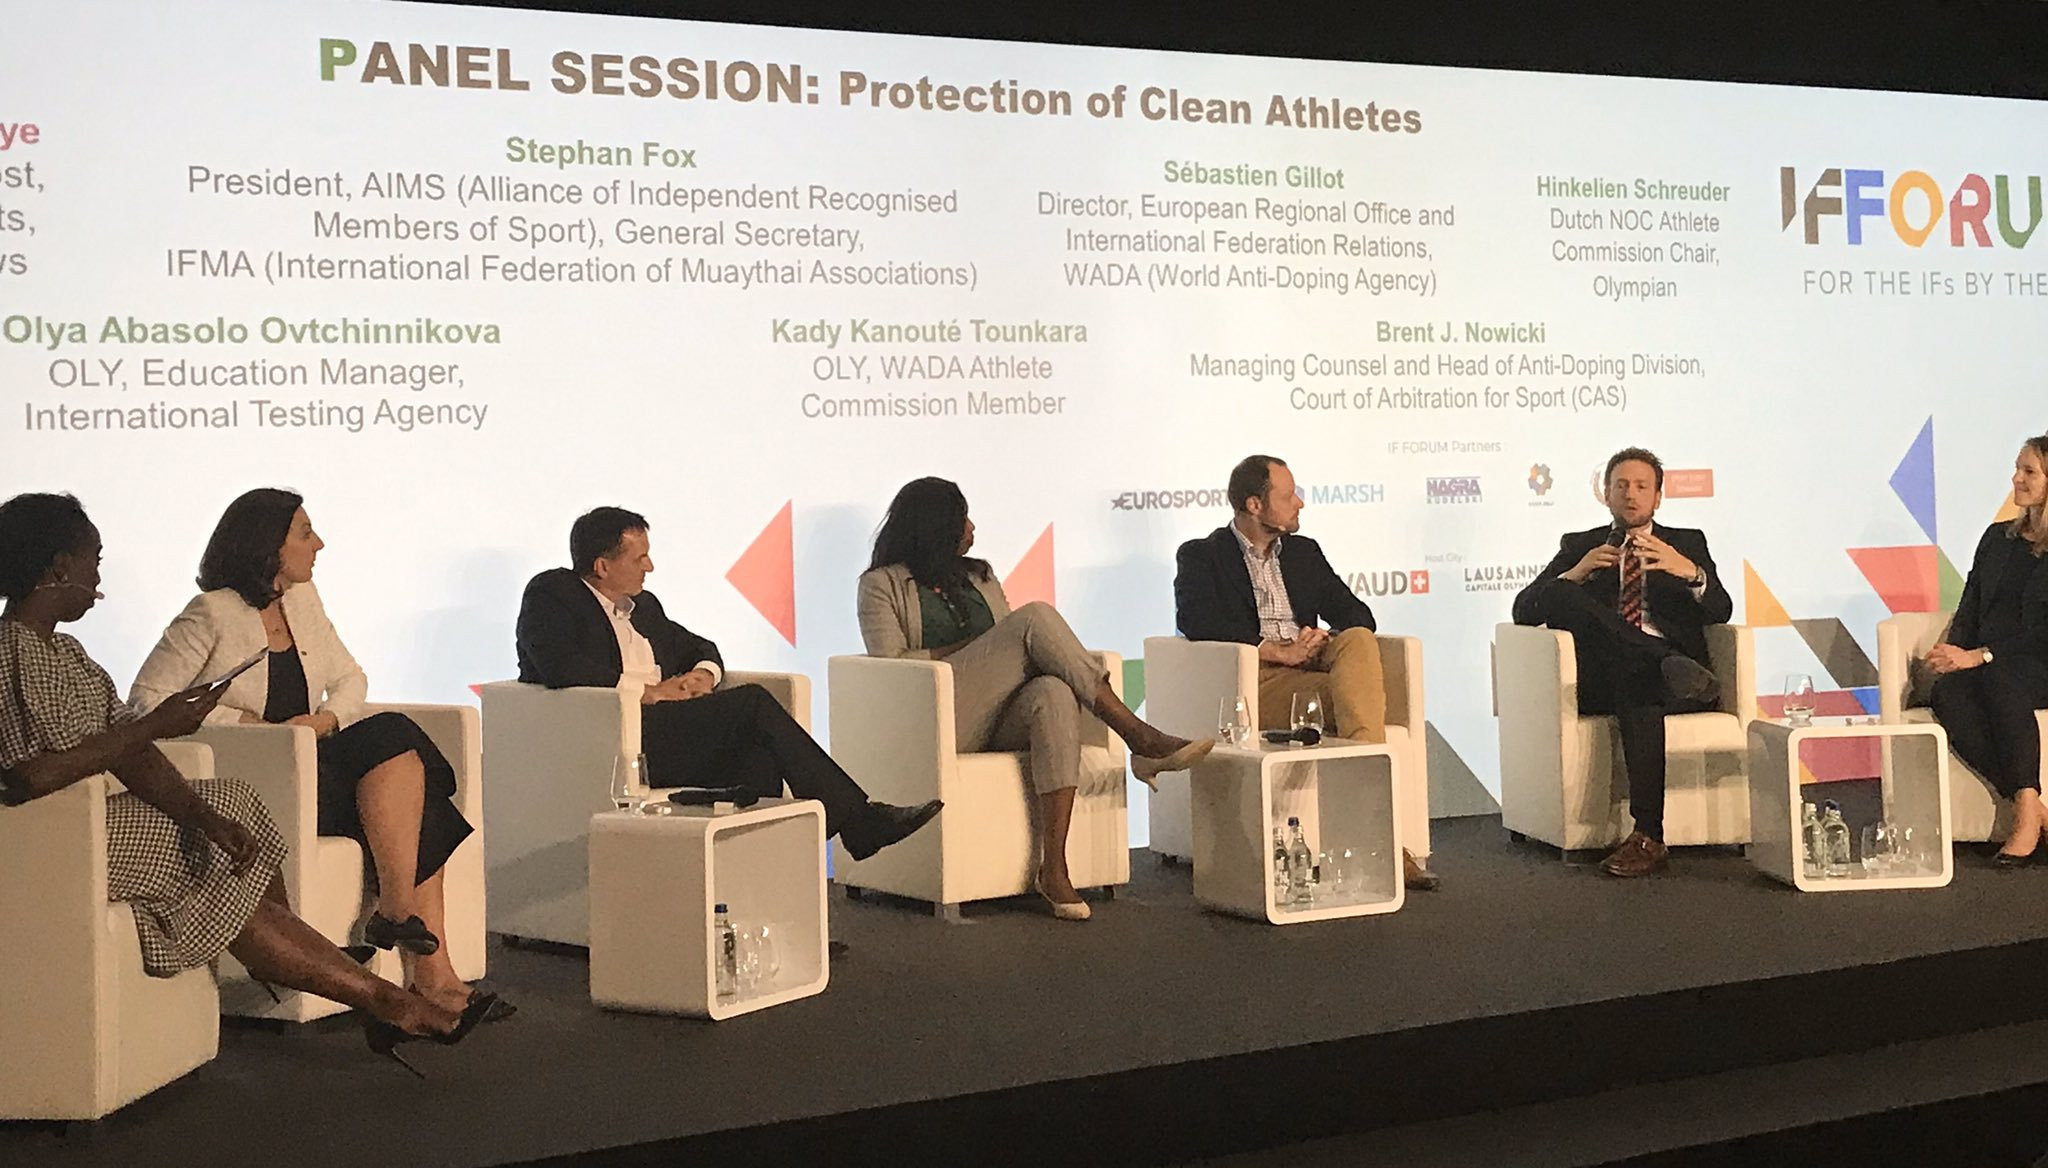 Protecting the clean athlete was a well-attended session ©Twitter